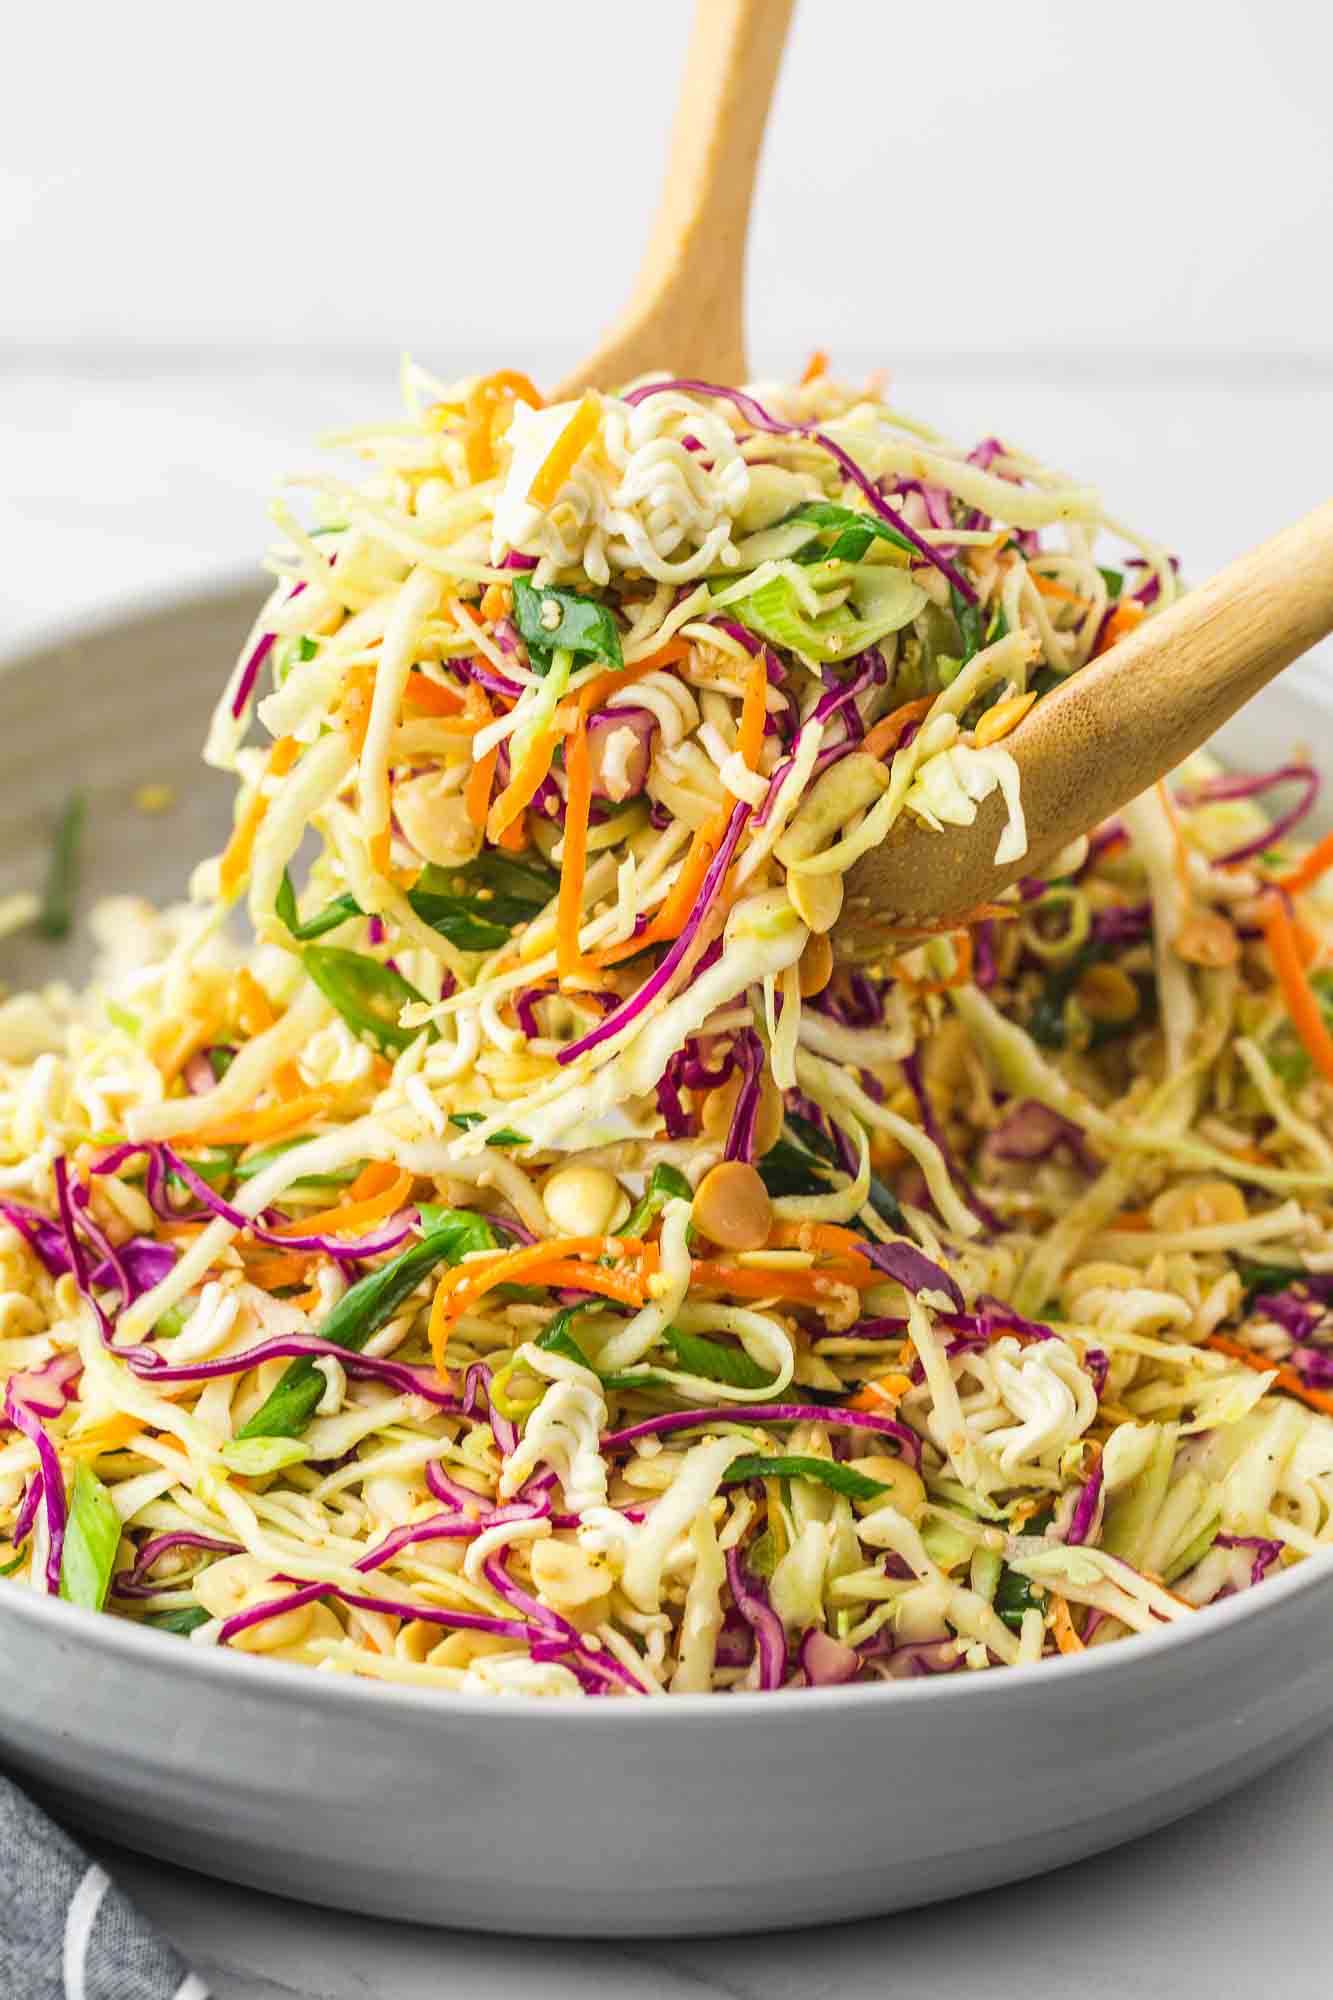 How To Toast Ramen Noodles For Salads?